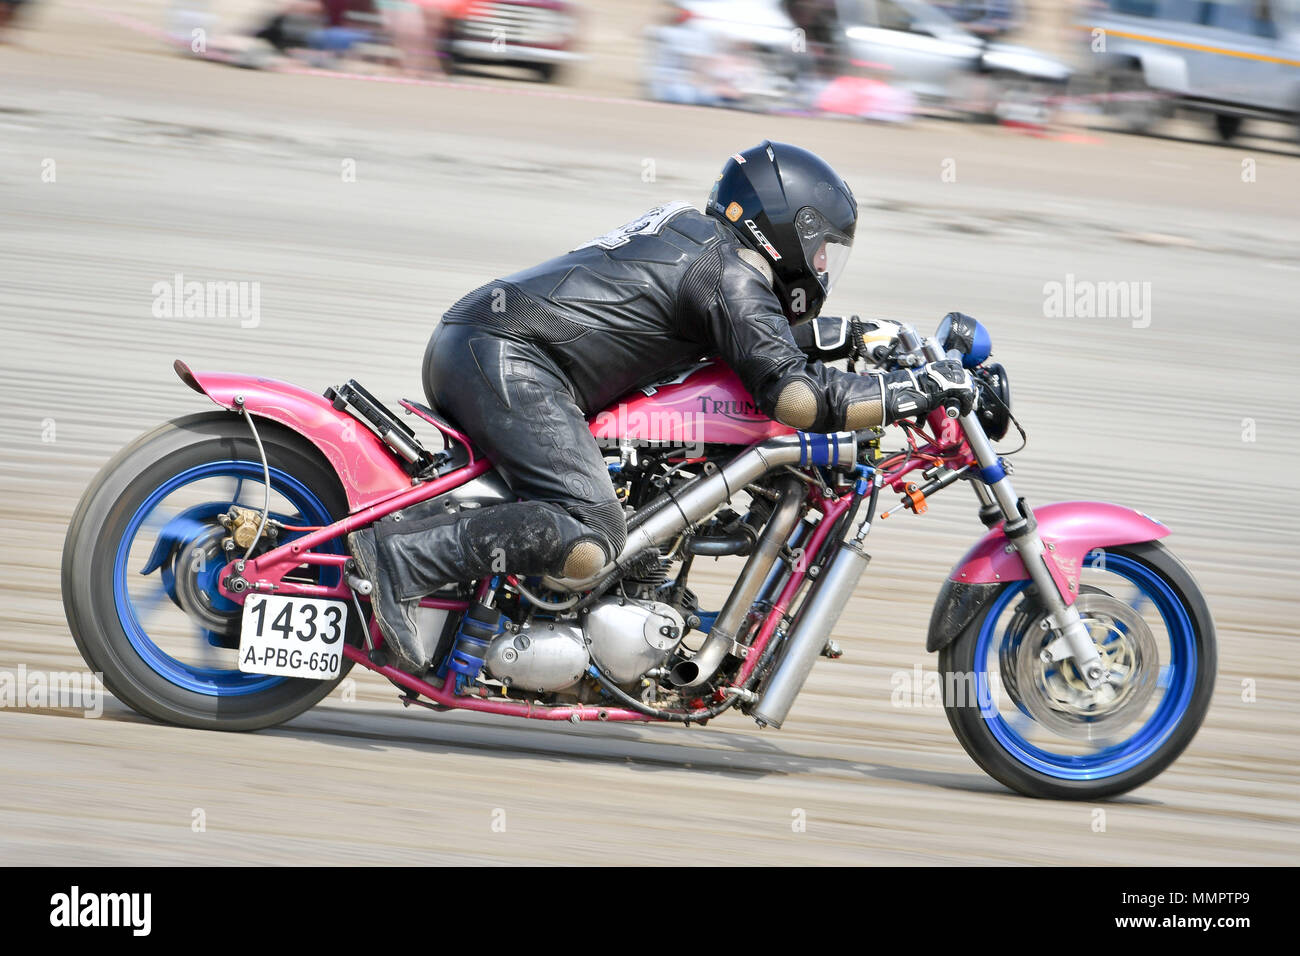 A competitor on motorbike takes part in the annual UK, European and World land speed event organised by Straightliners, at Pendine Sands, Wales, where riders and drivers of all vehicle types compete in classes for top speeds over a measured mile on the beach. Stock Photo